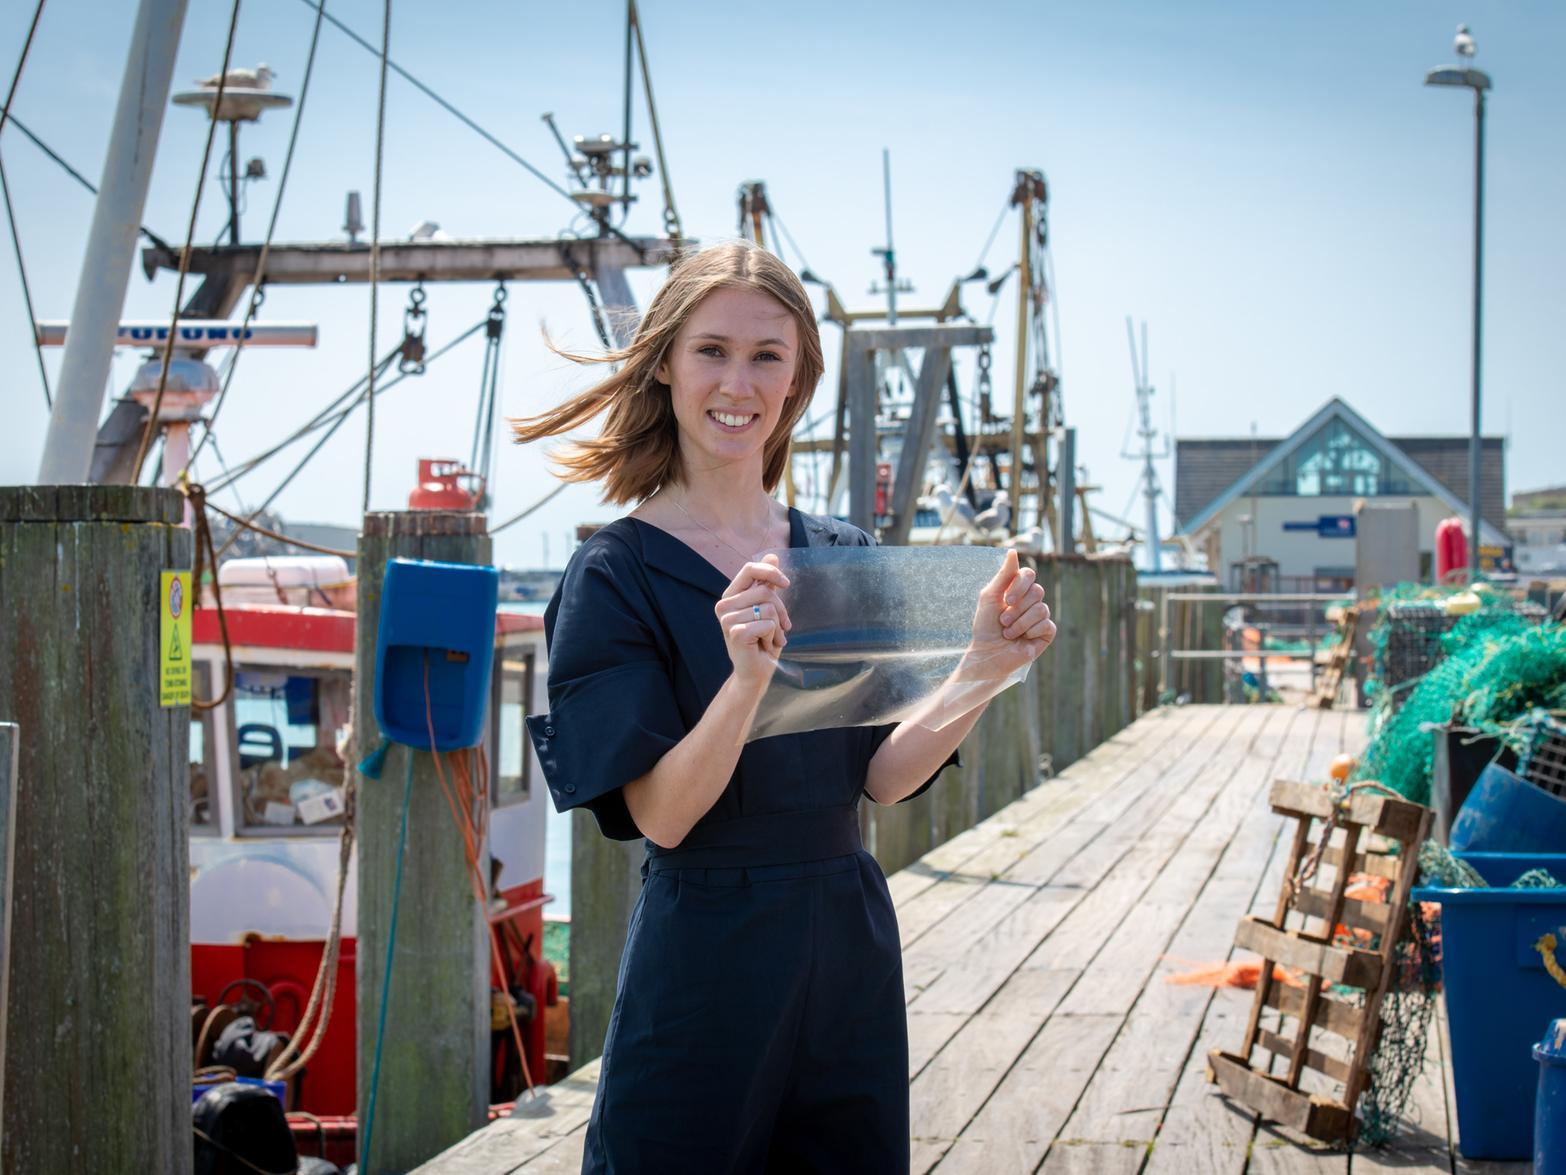 Twenty-four-year-old Lucy Hughes is the creator of a compostable alternative to single-use plastic film and bags, using waste material from the fishing industry.